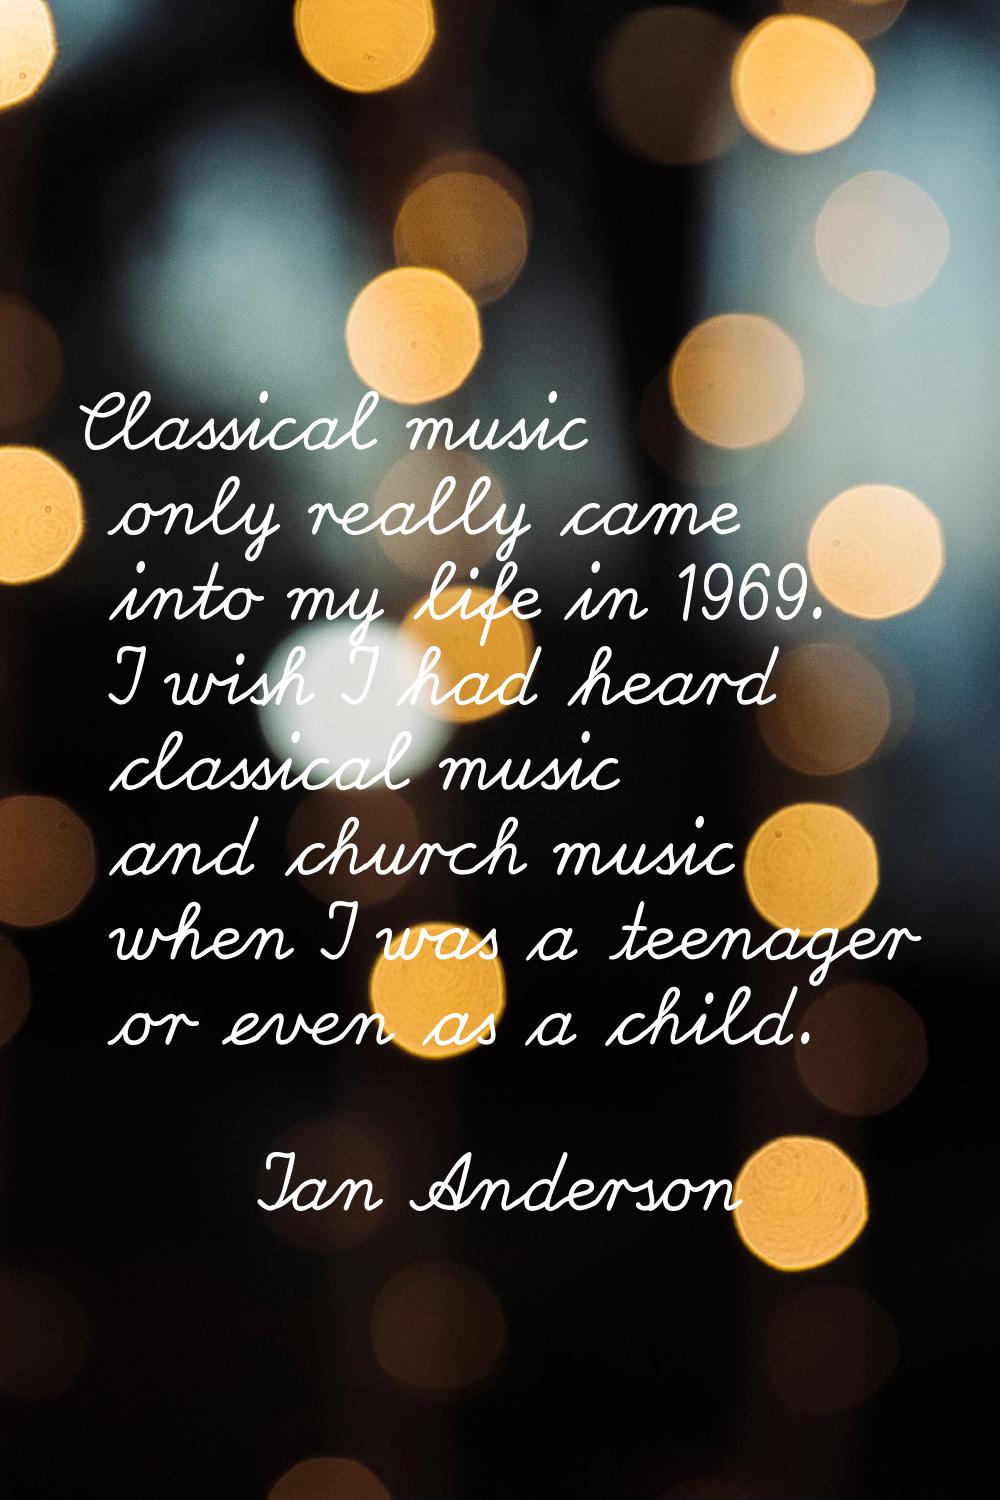 Classical music only really came into my life in 1969. I wish I had heard classical music and churc